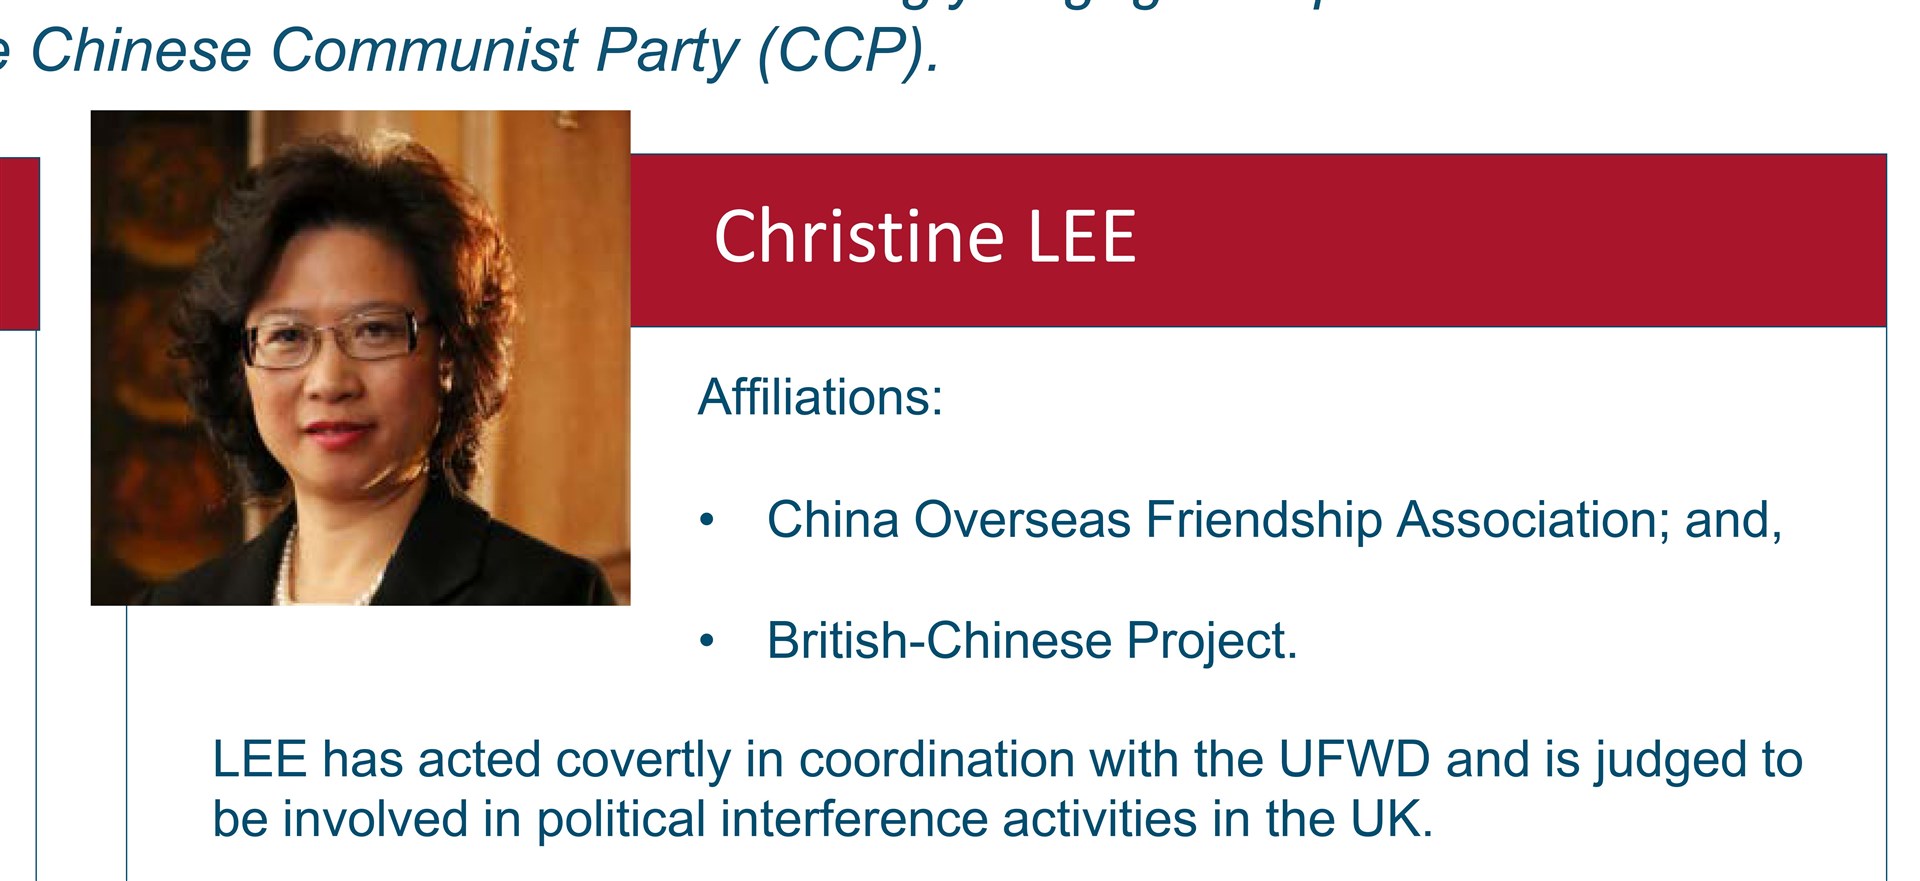 MI5 issued a rare security alert last year, warning that suspected Chinese spy Christine Lee had engaged in ‘political interference activities’ on behalf of China’s ruling communist regime (MI5/PA)